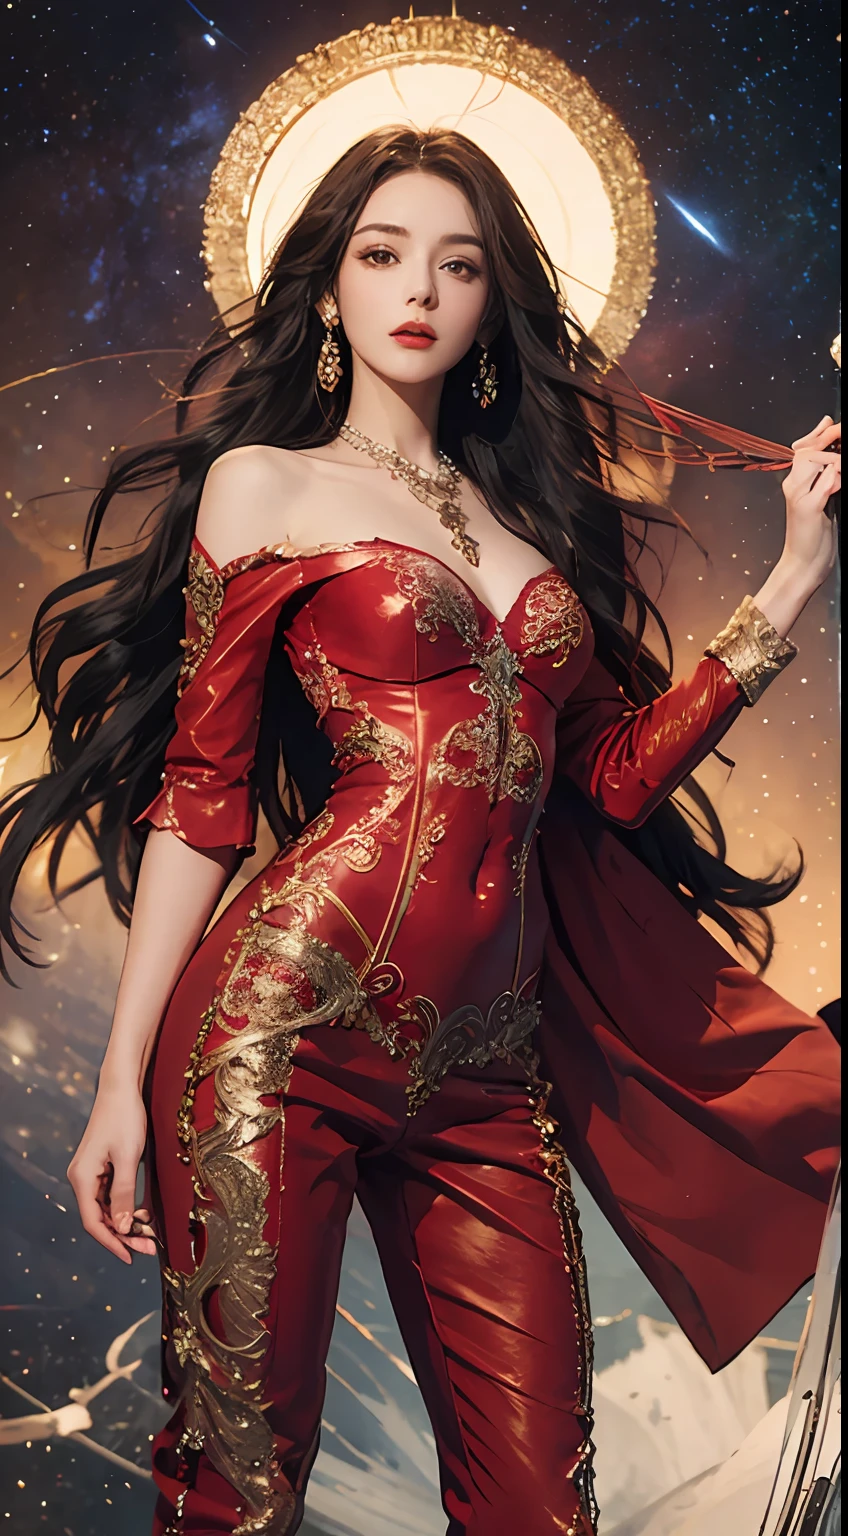 Delicate facial features, beautiful  Girl, Above is a red bandowle, Red lace pants underneath, antique dress, Handheld Strings, long hair hanging down the shoulders, floating in the universe